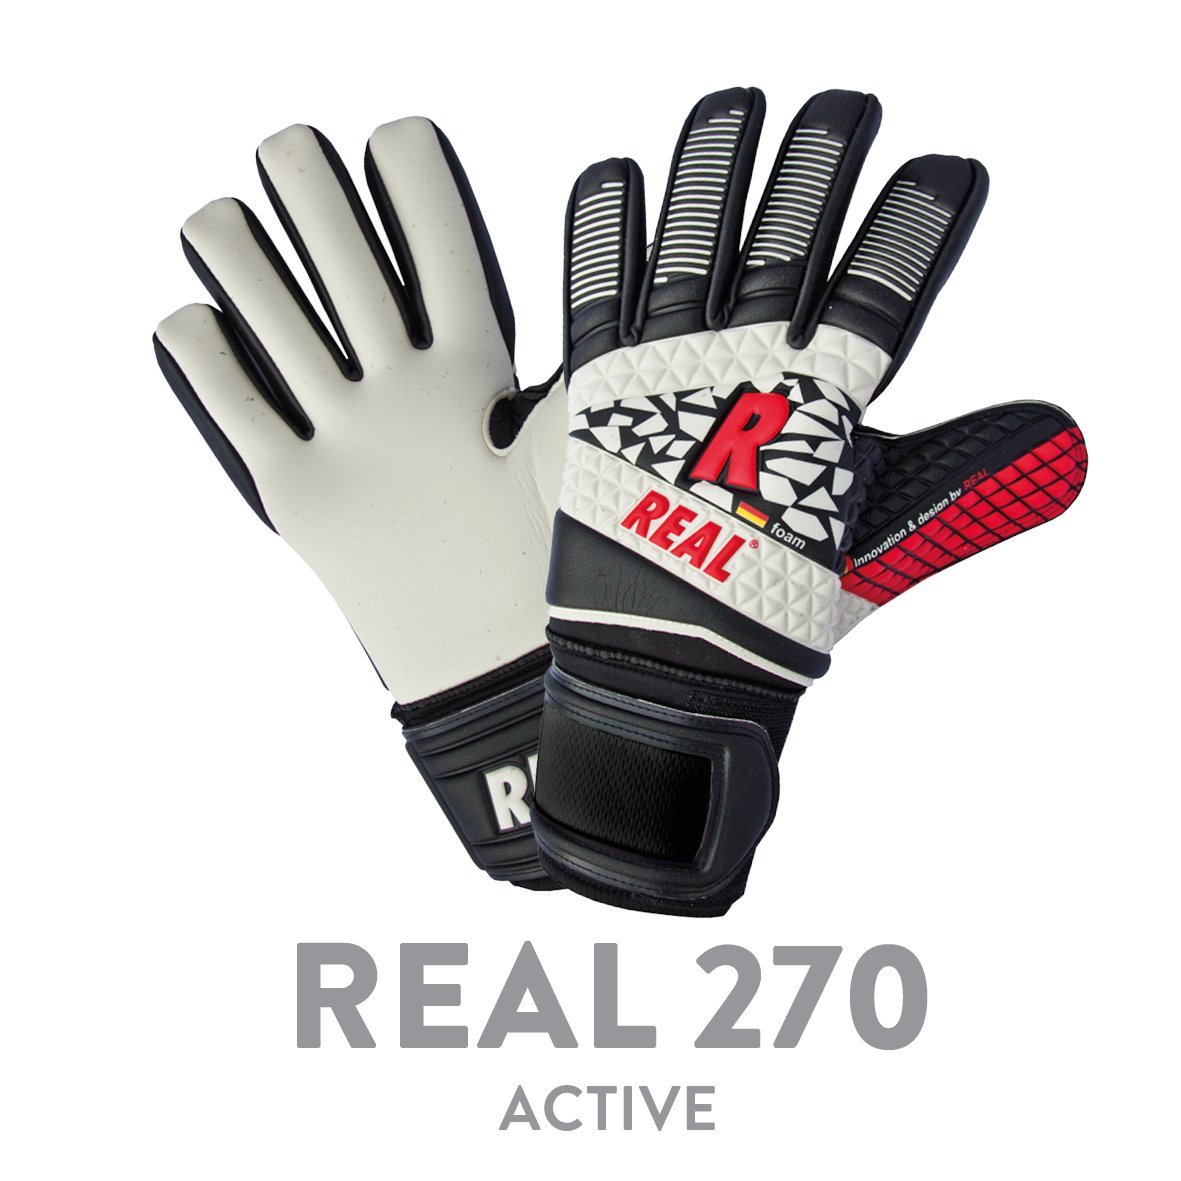 REAL KPHSCH 270 ACTIVE THERMO